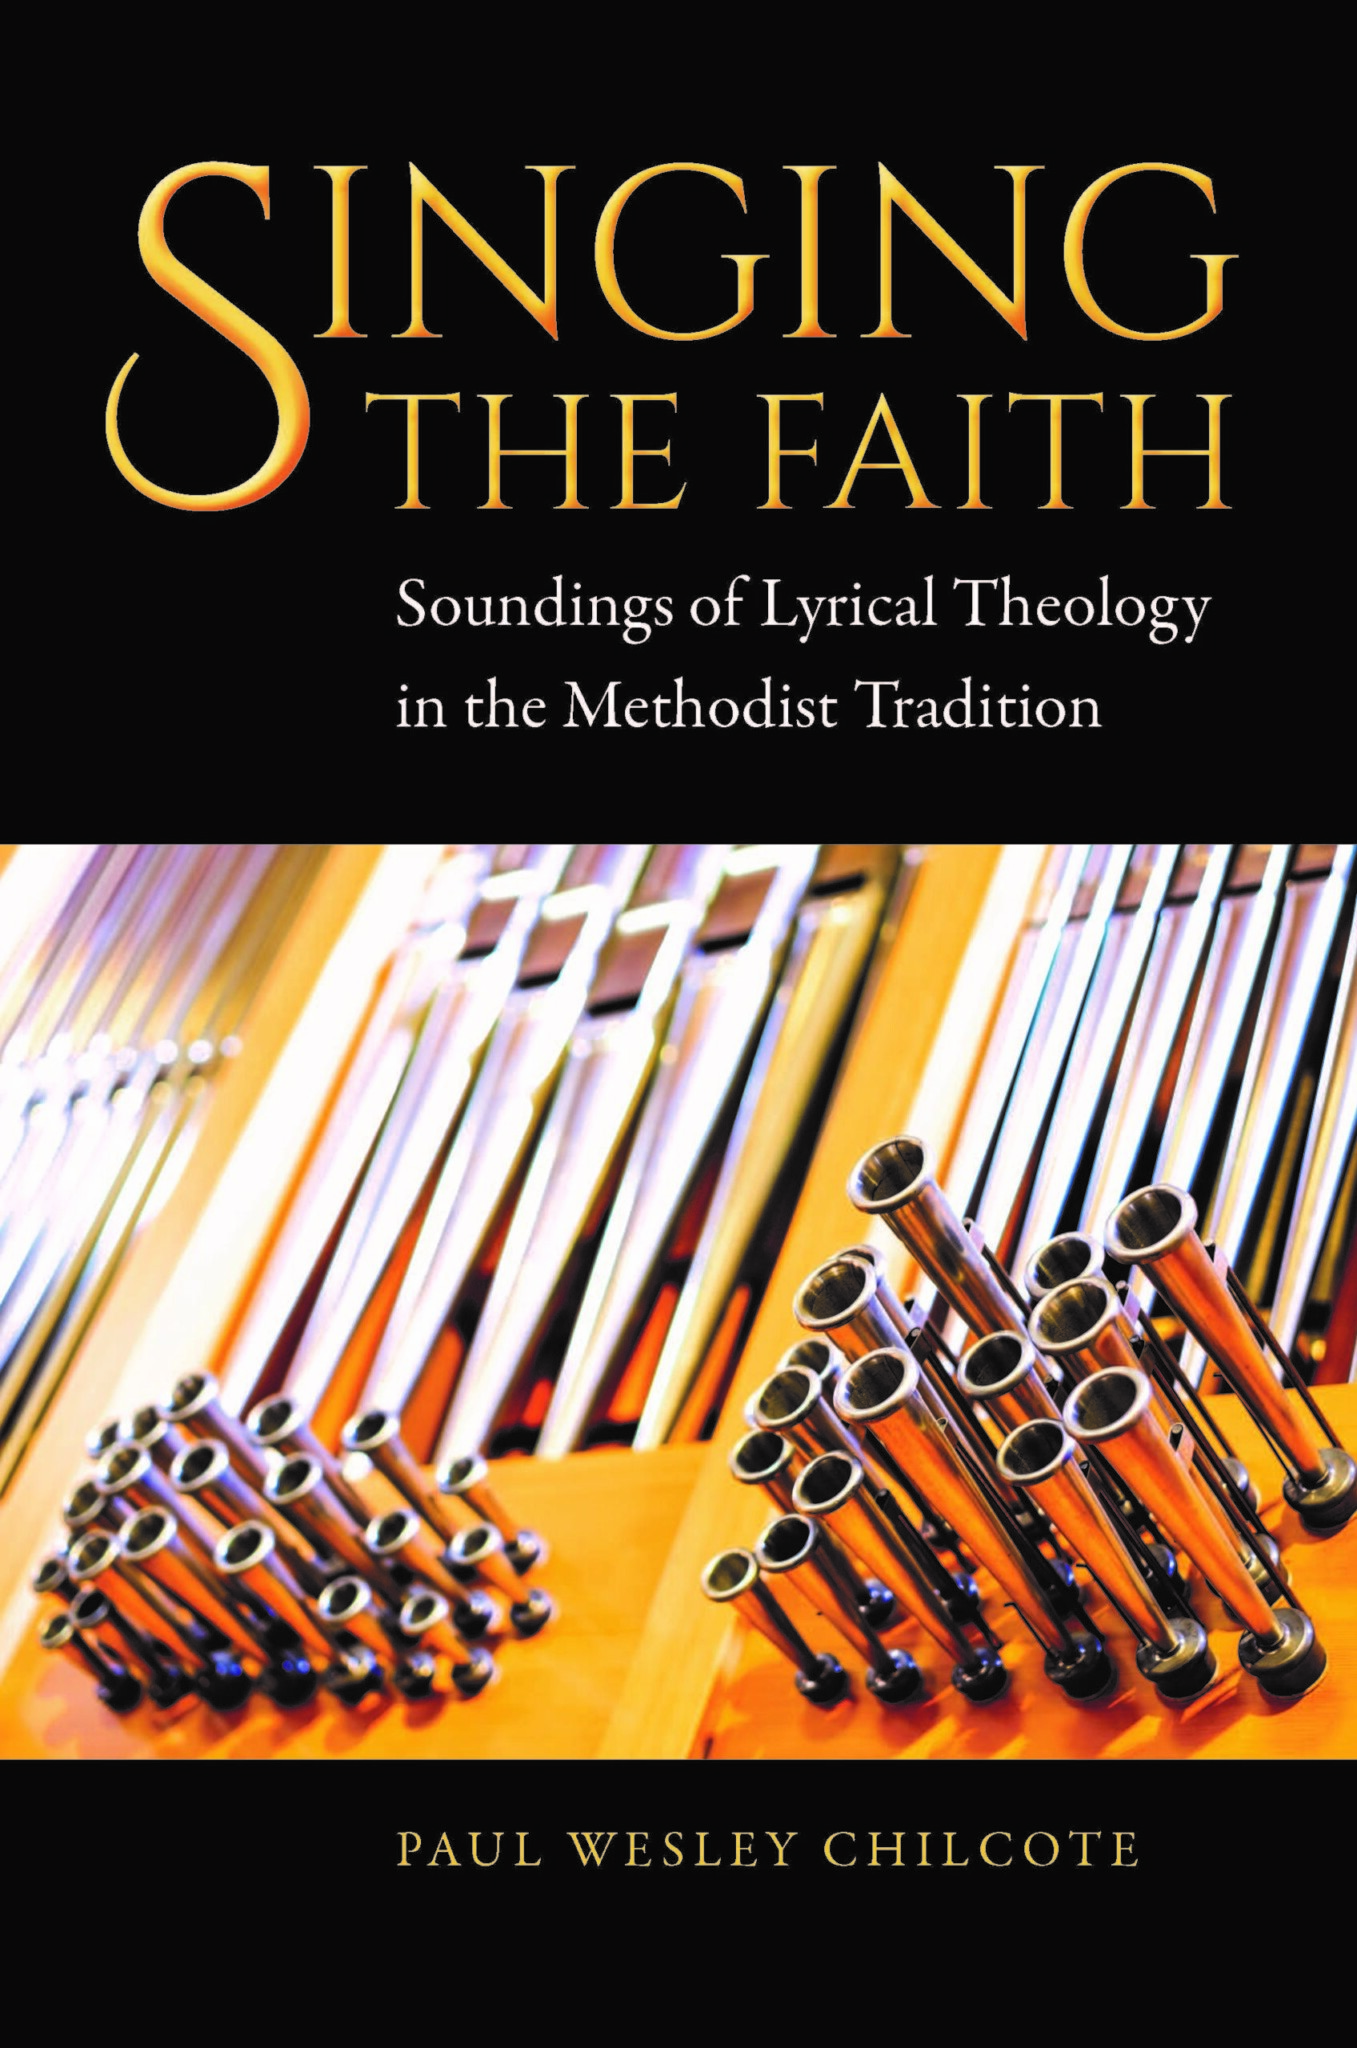 Singing the Faith Soundings of Lyrical Theology in the Methodist Tradition